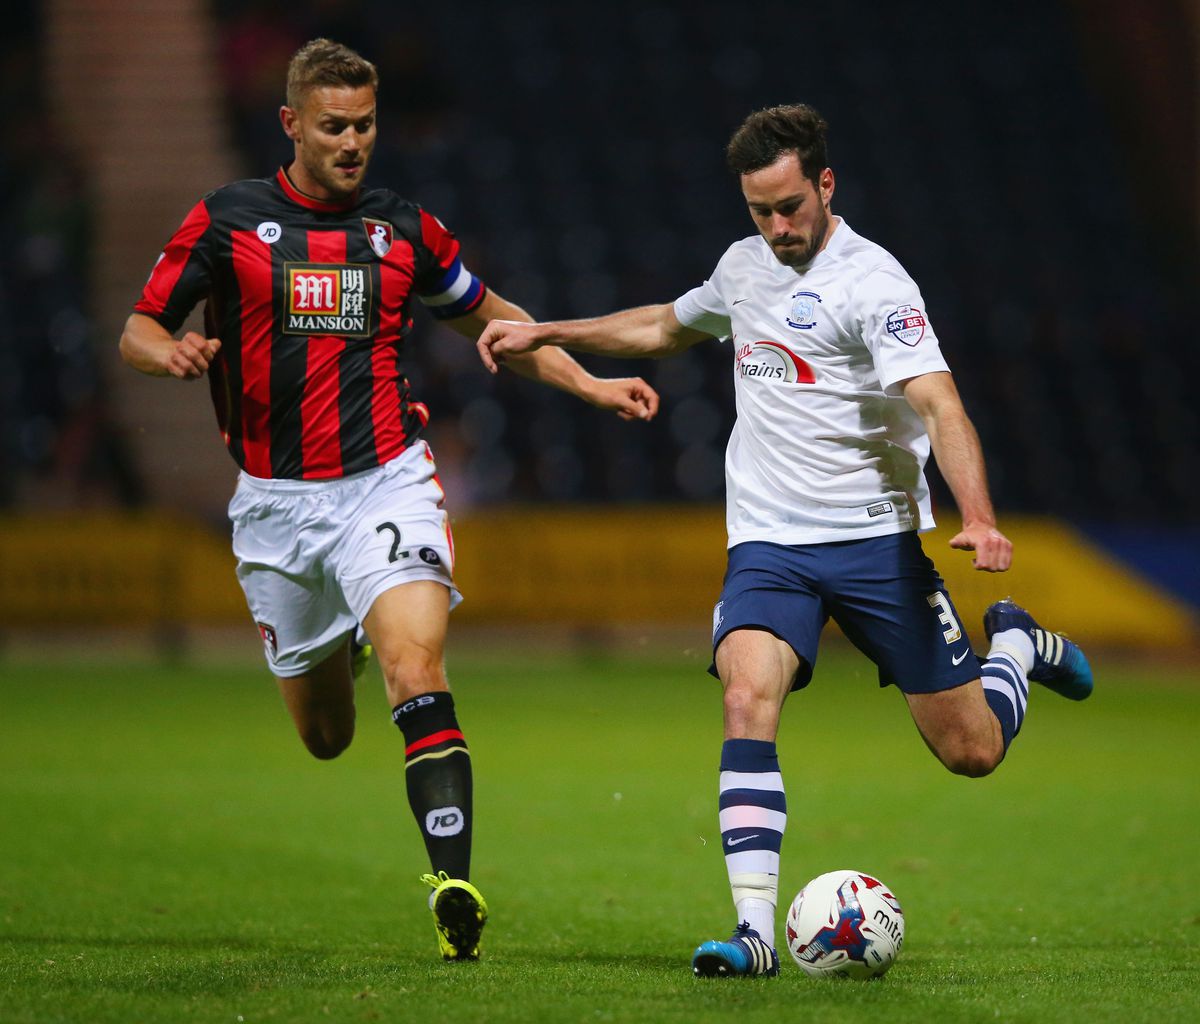 Preston North End v AFC Bournemouth - Capital One Cup Third Round